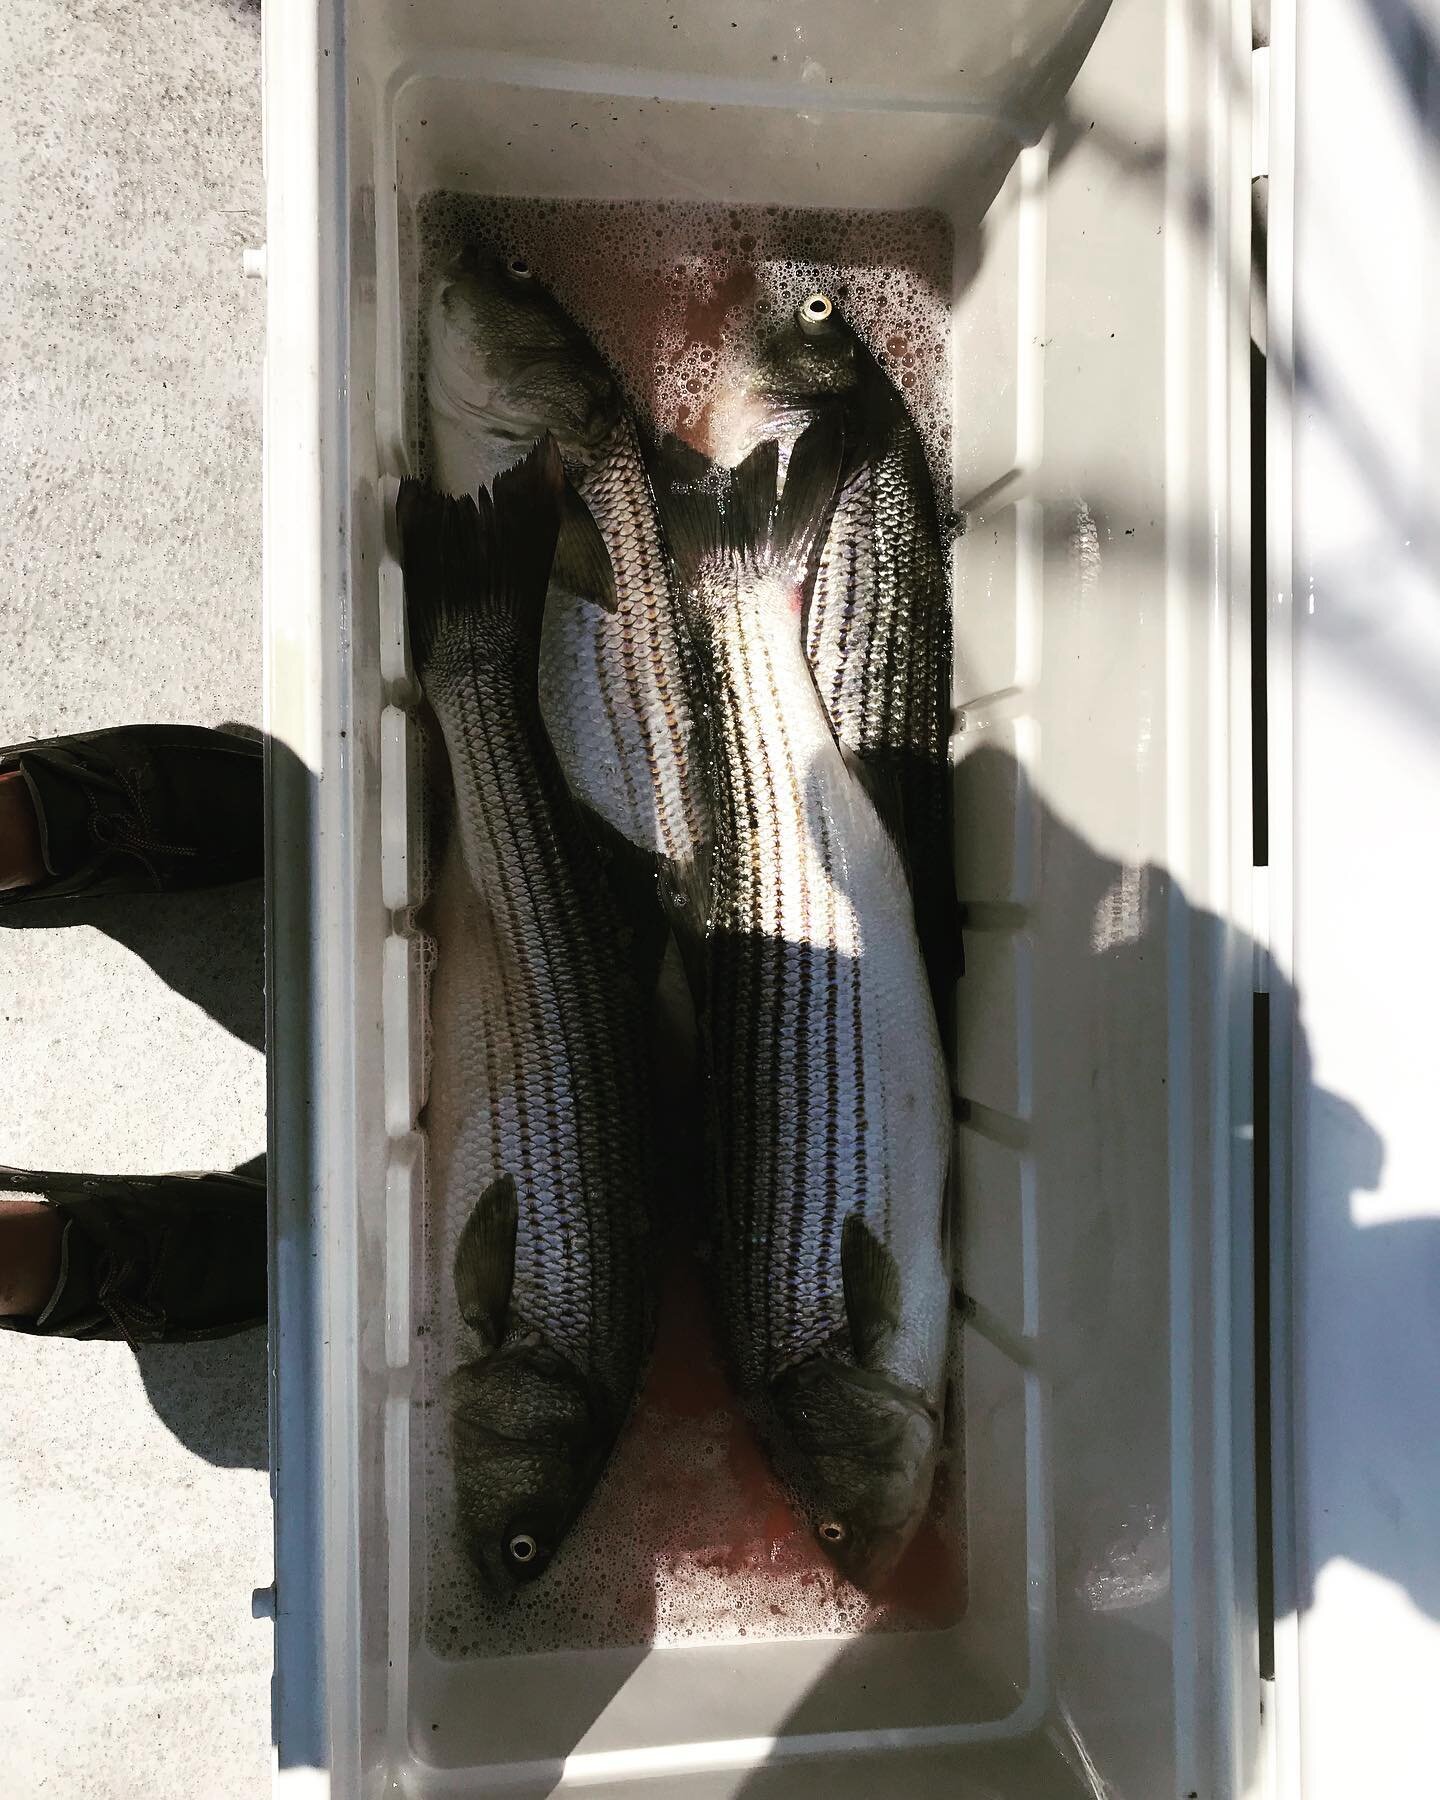 Maxed out on Bass this morning along with releasing several other keepers